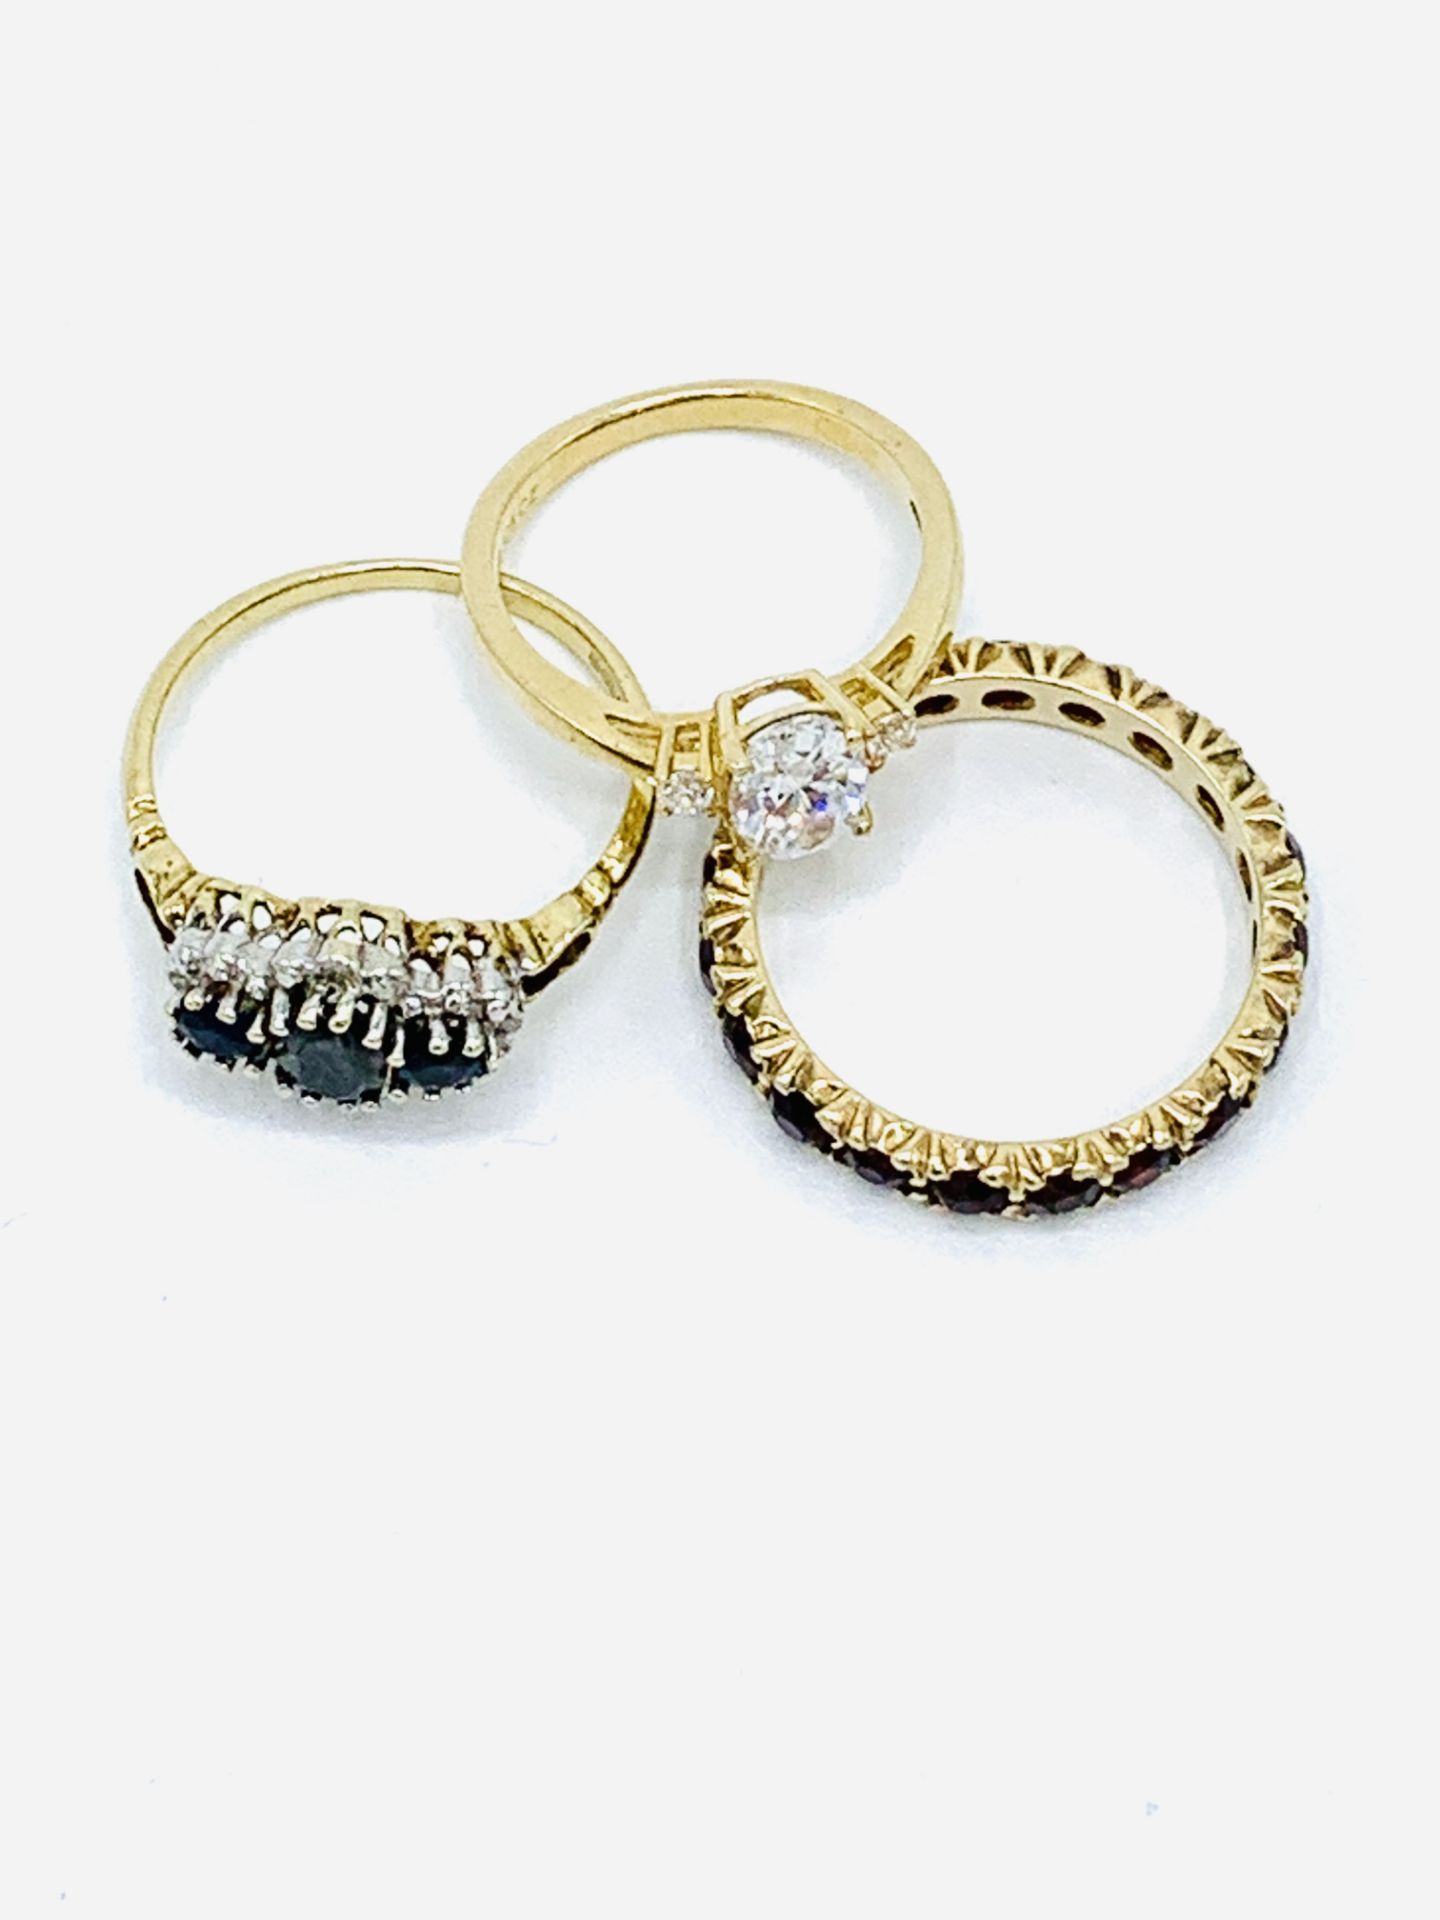 Three 9ct gold and precious stone rings - Image 2 of 3